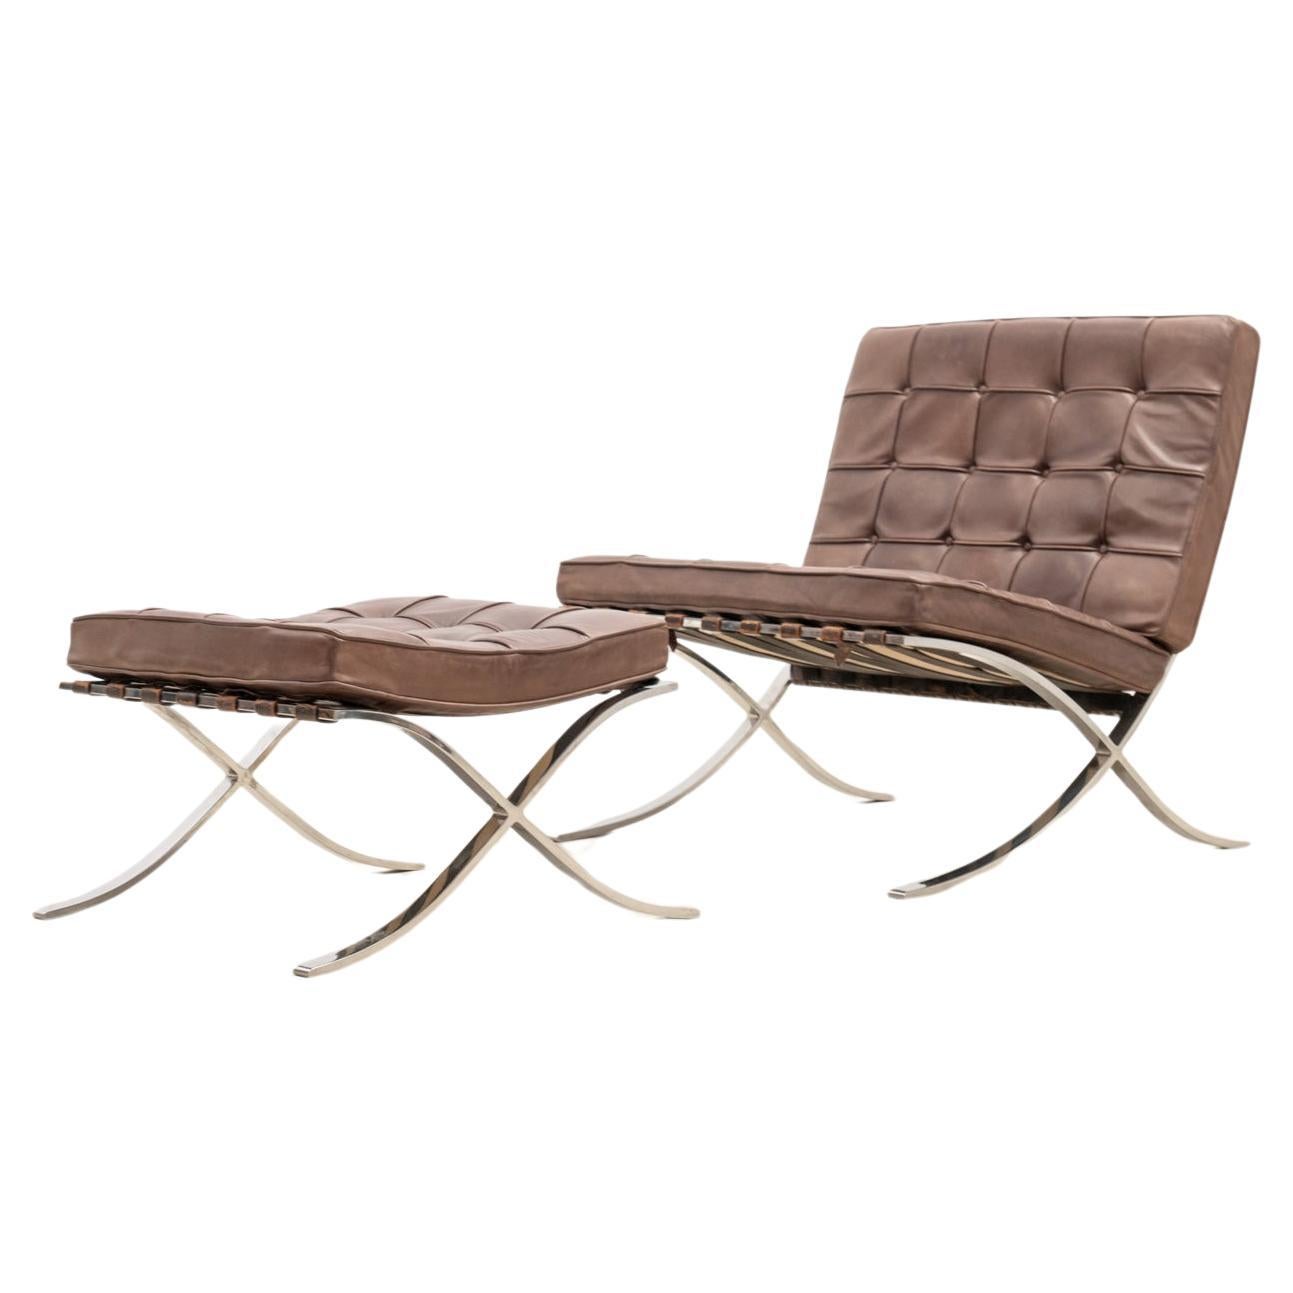  Early Barcelona Chair by Mies Van Der Rohe  For Sale